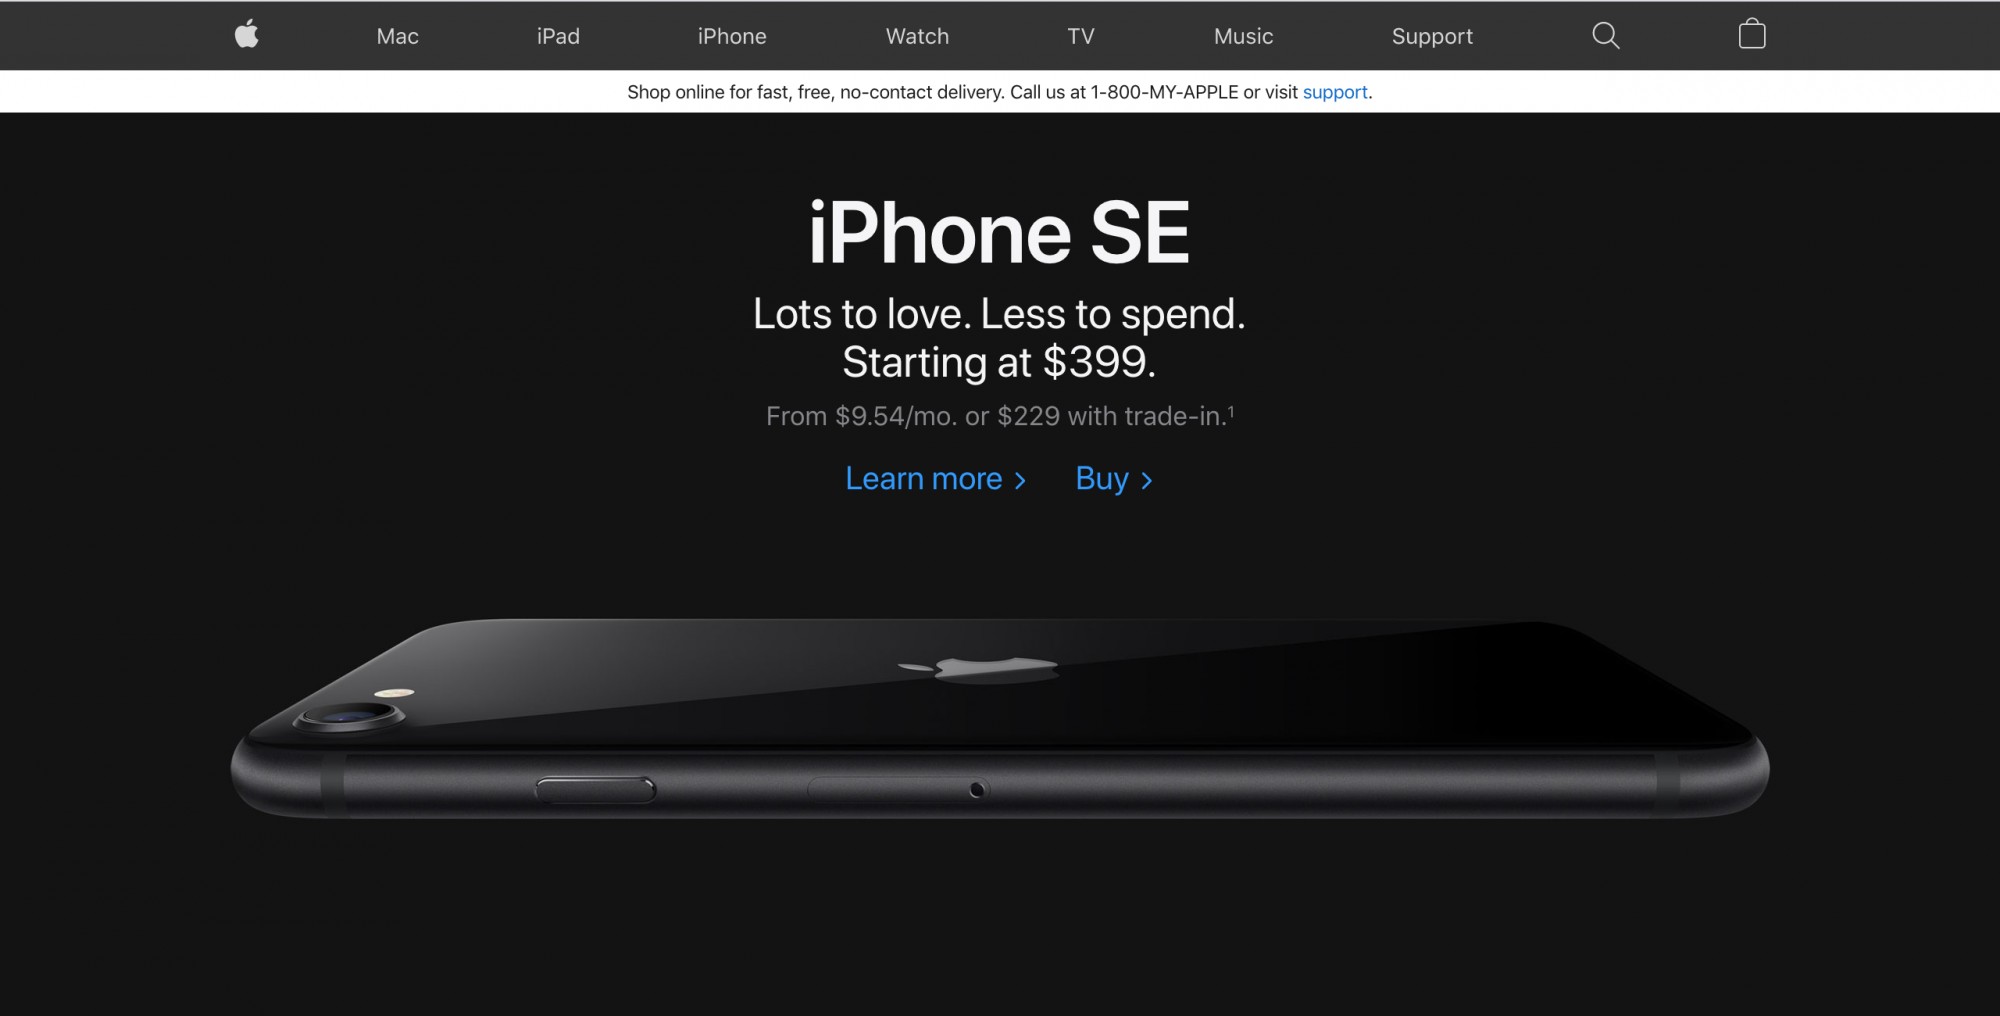 apple landing page with iphone SE and main message with buttons